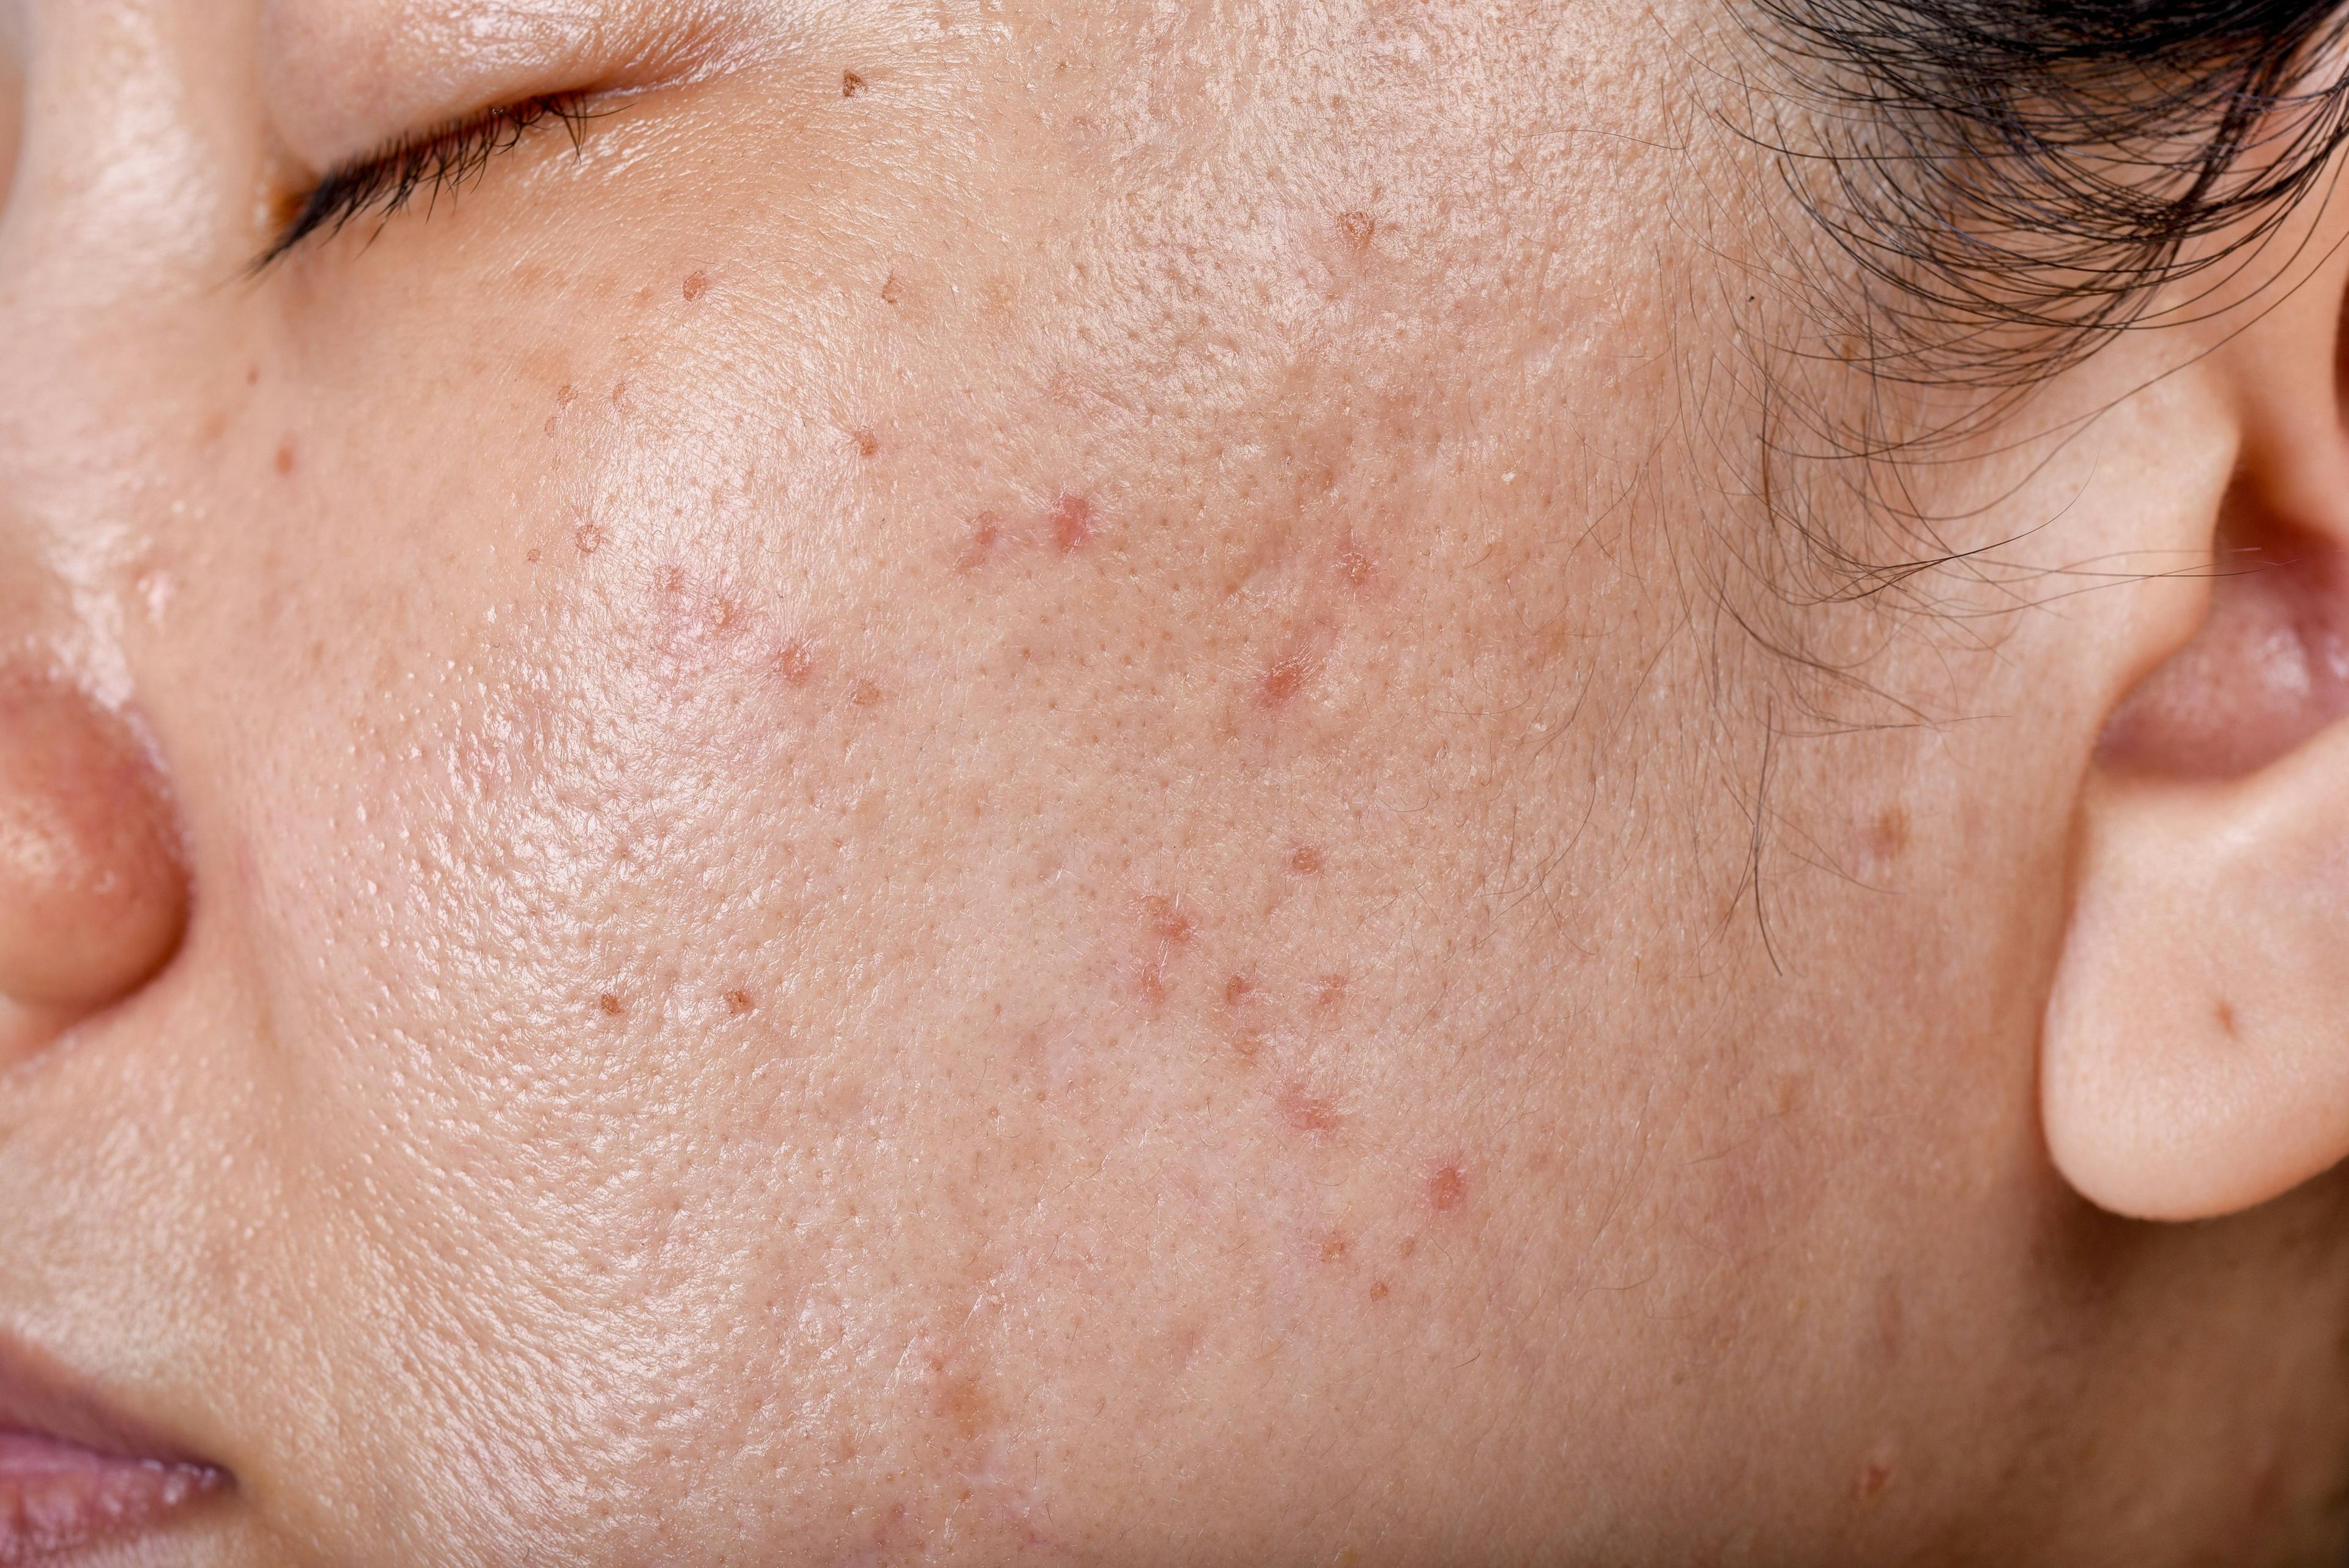 Microneedling Produces Beneficial Acne Vulgaris Outcomes Without Disrupting Skin Structure or Microbiome